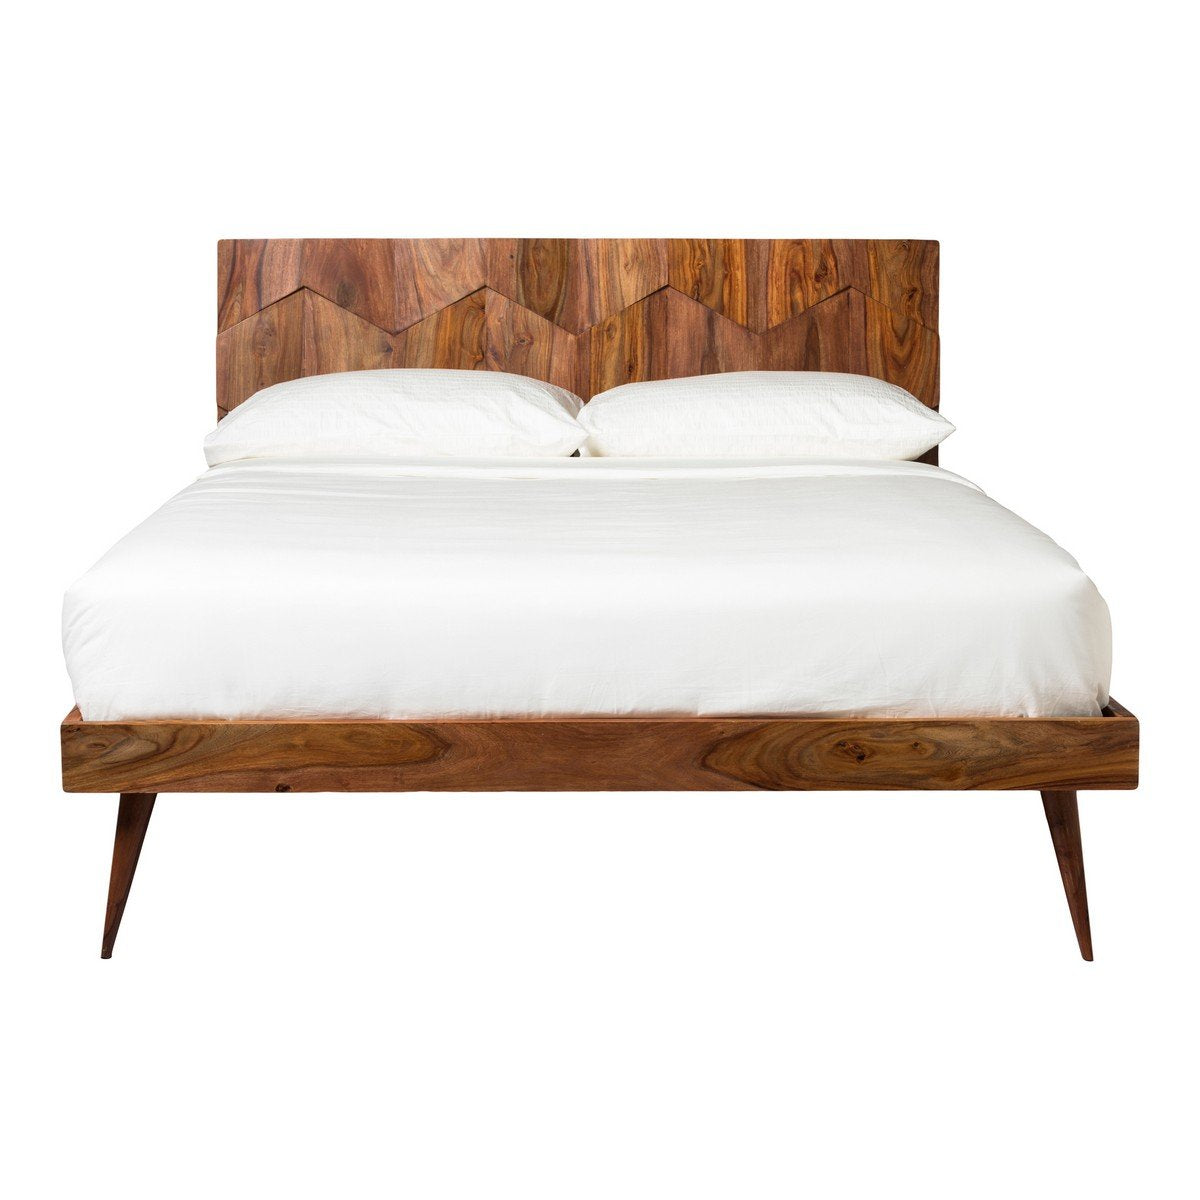 Moe's Home Collection O2 King Bed - BZ-1044-24 - Moe's Home Collection - Beds - Minimal And Modern - 1